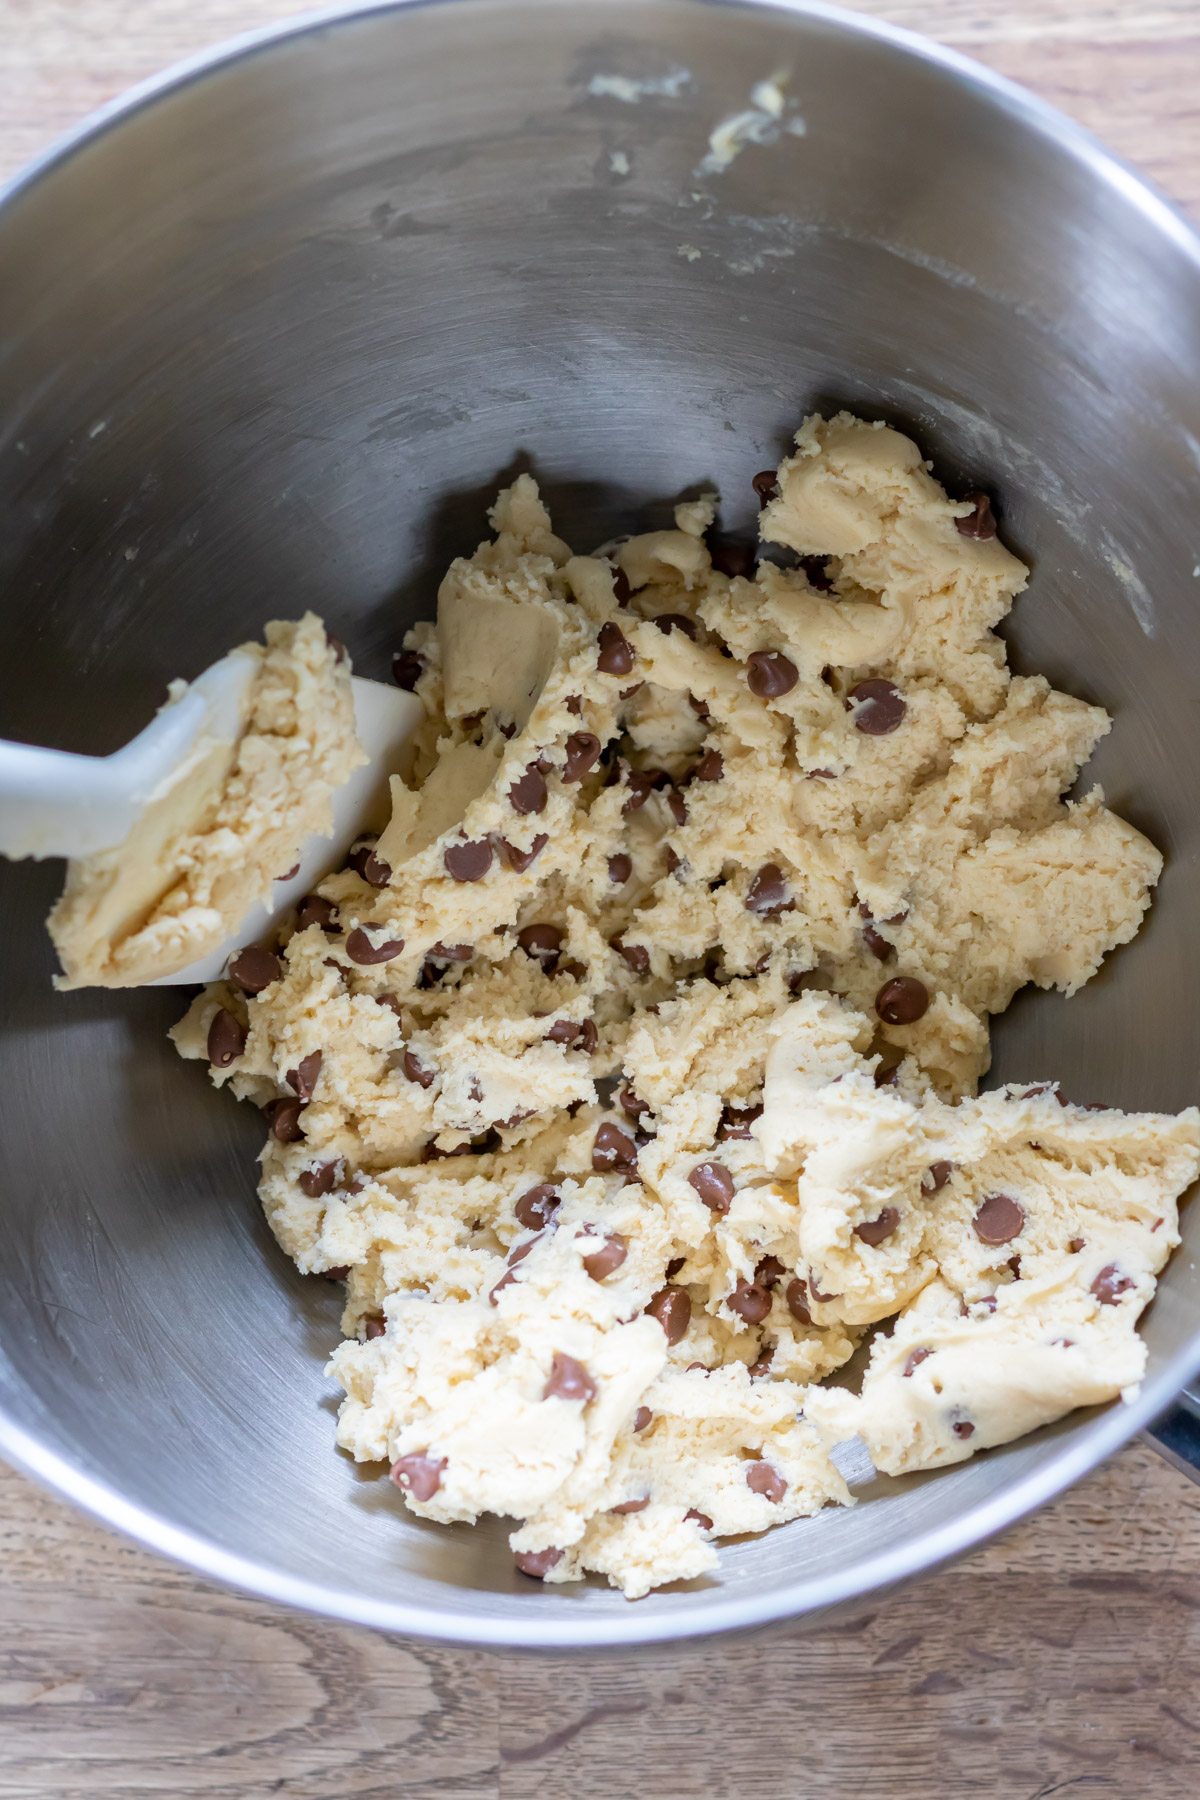 Mixed chocolate chip condensed milk cookie dough.